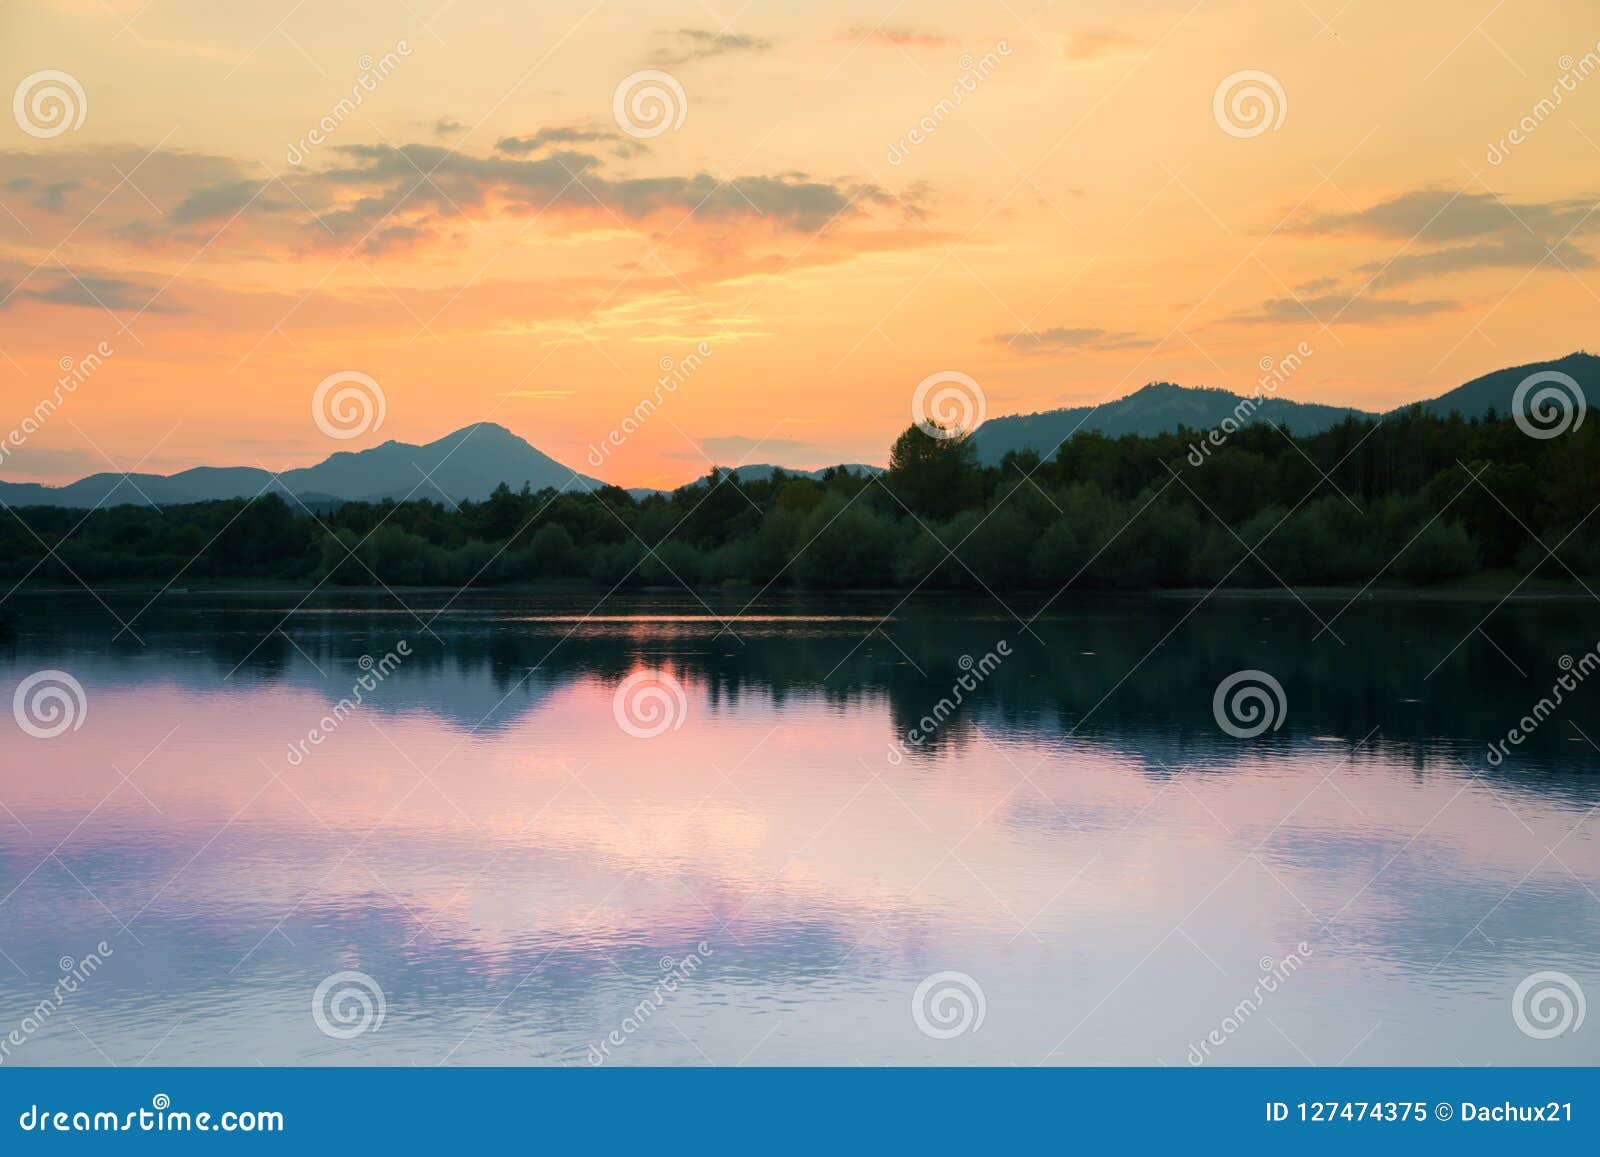 A Beautiful Colorful Sunset Landscape With Lake Mountain And Forest